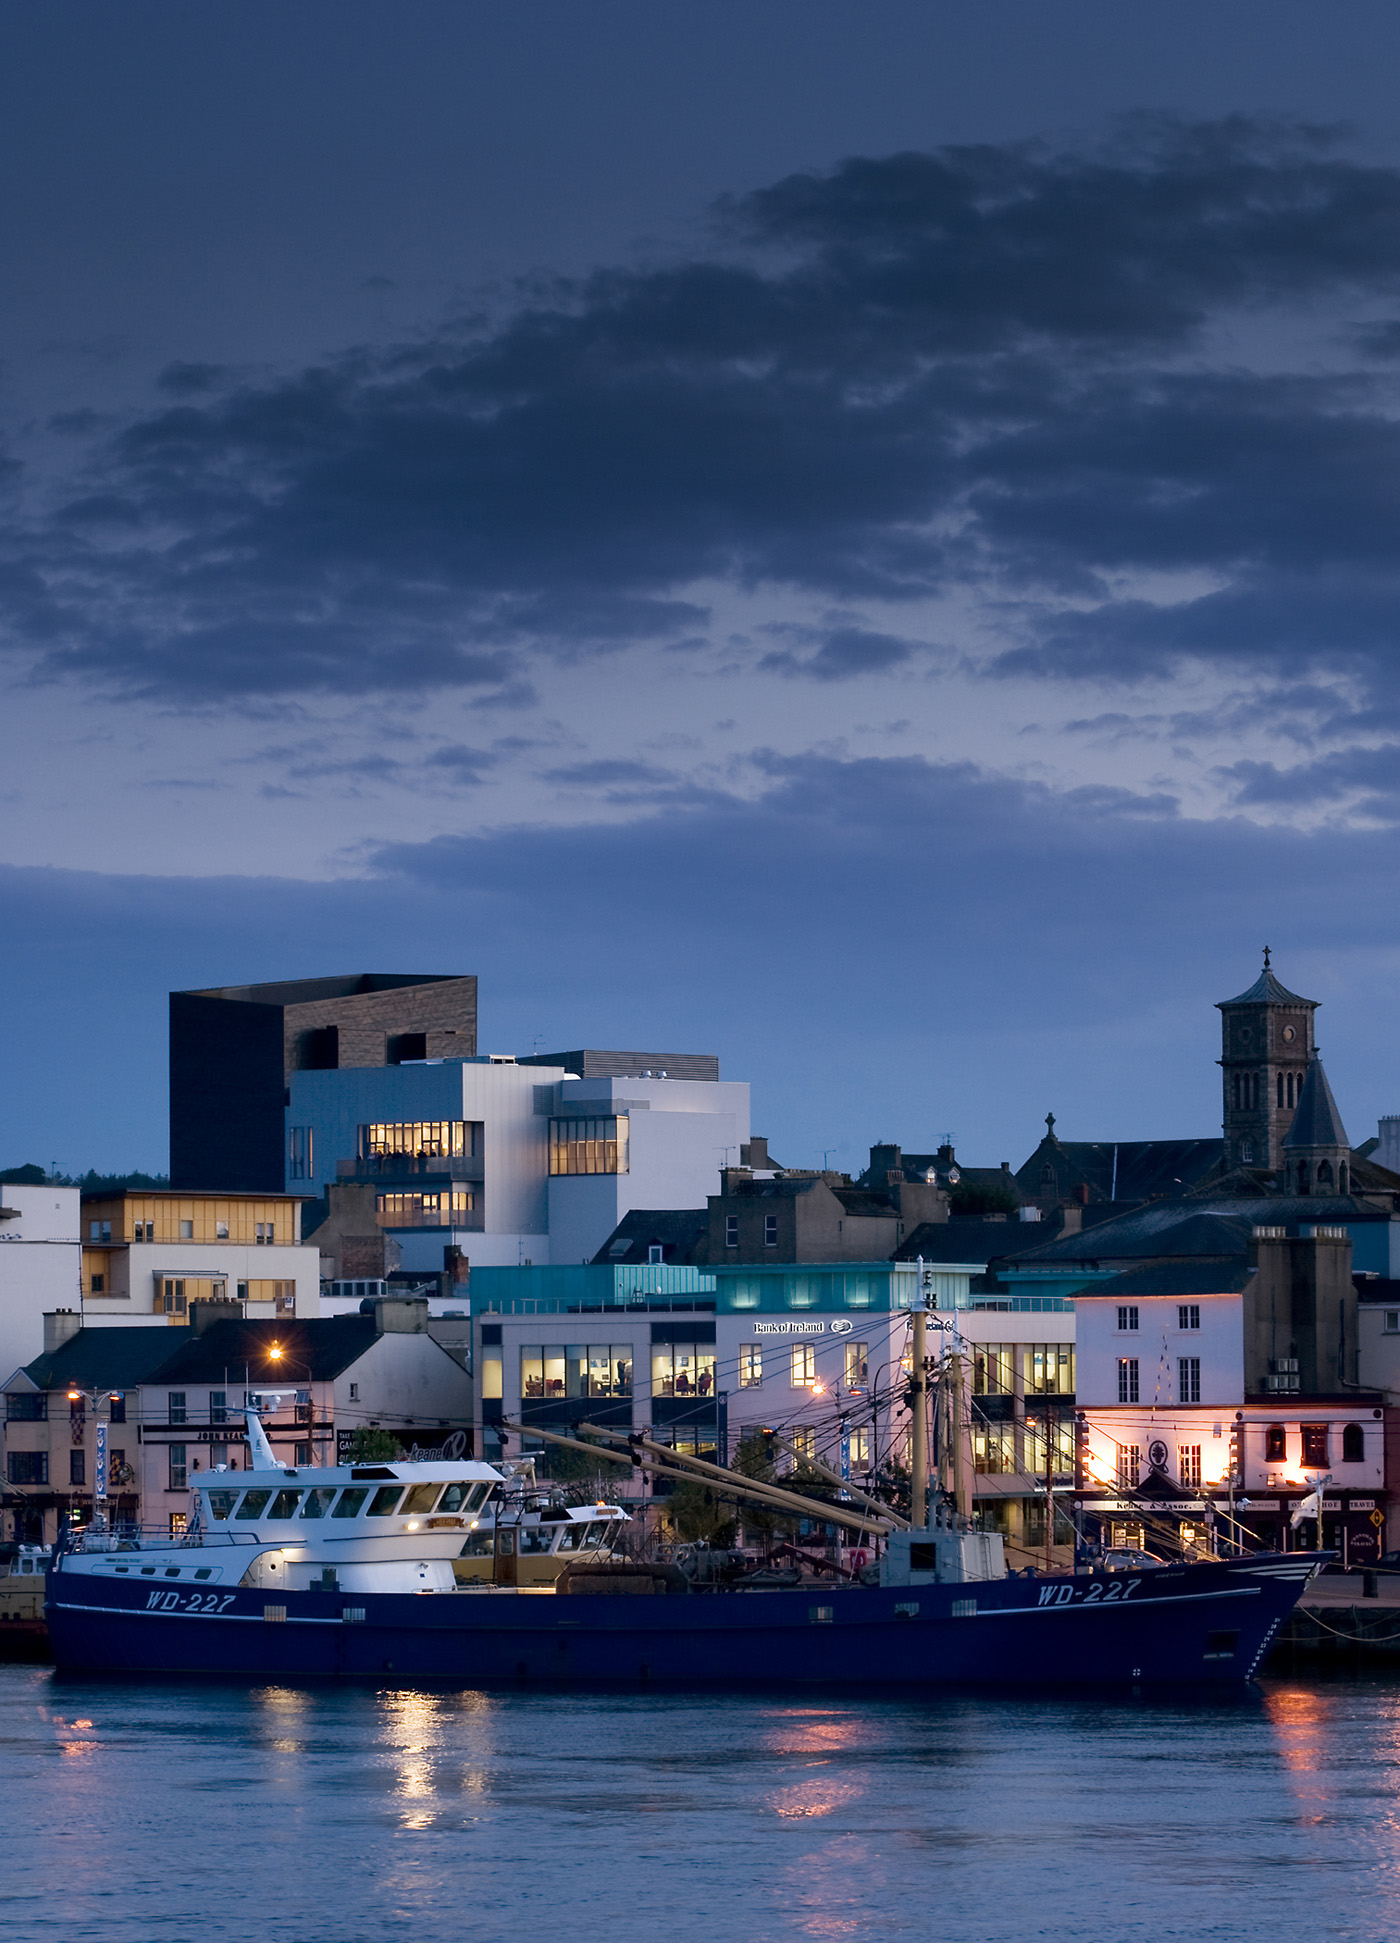 Night view of the National Opera House and waterfront viewed from across the River Slaney, Wexford Ireland. One of the great small opera houses of the world.